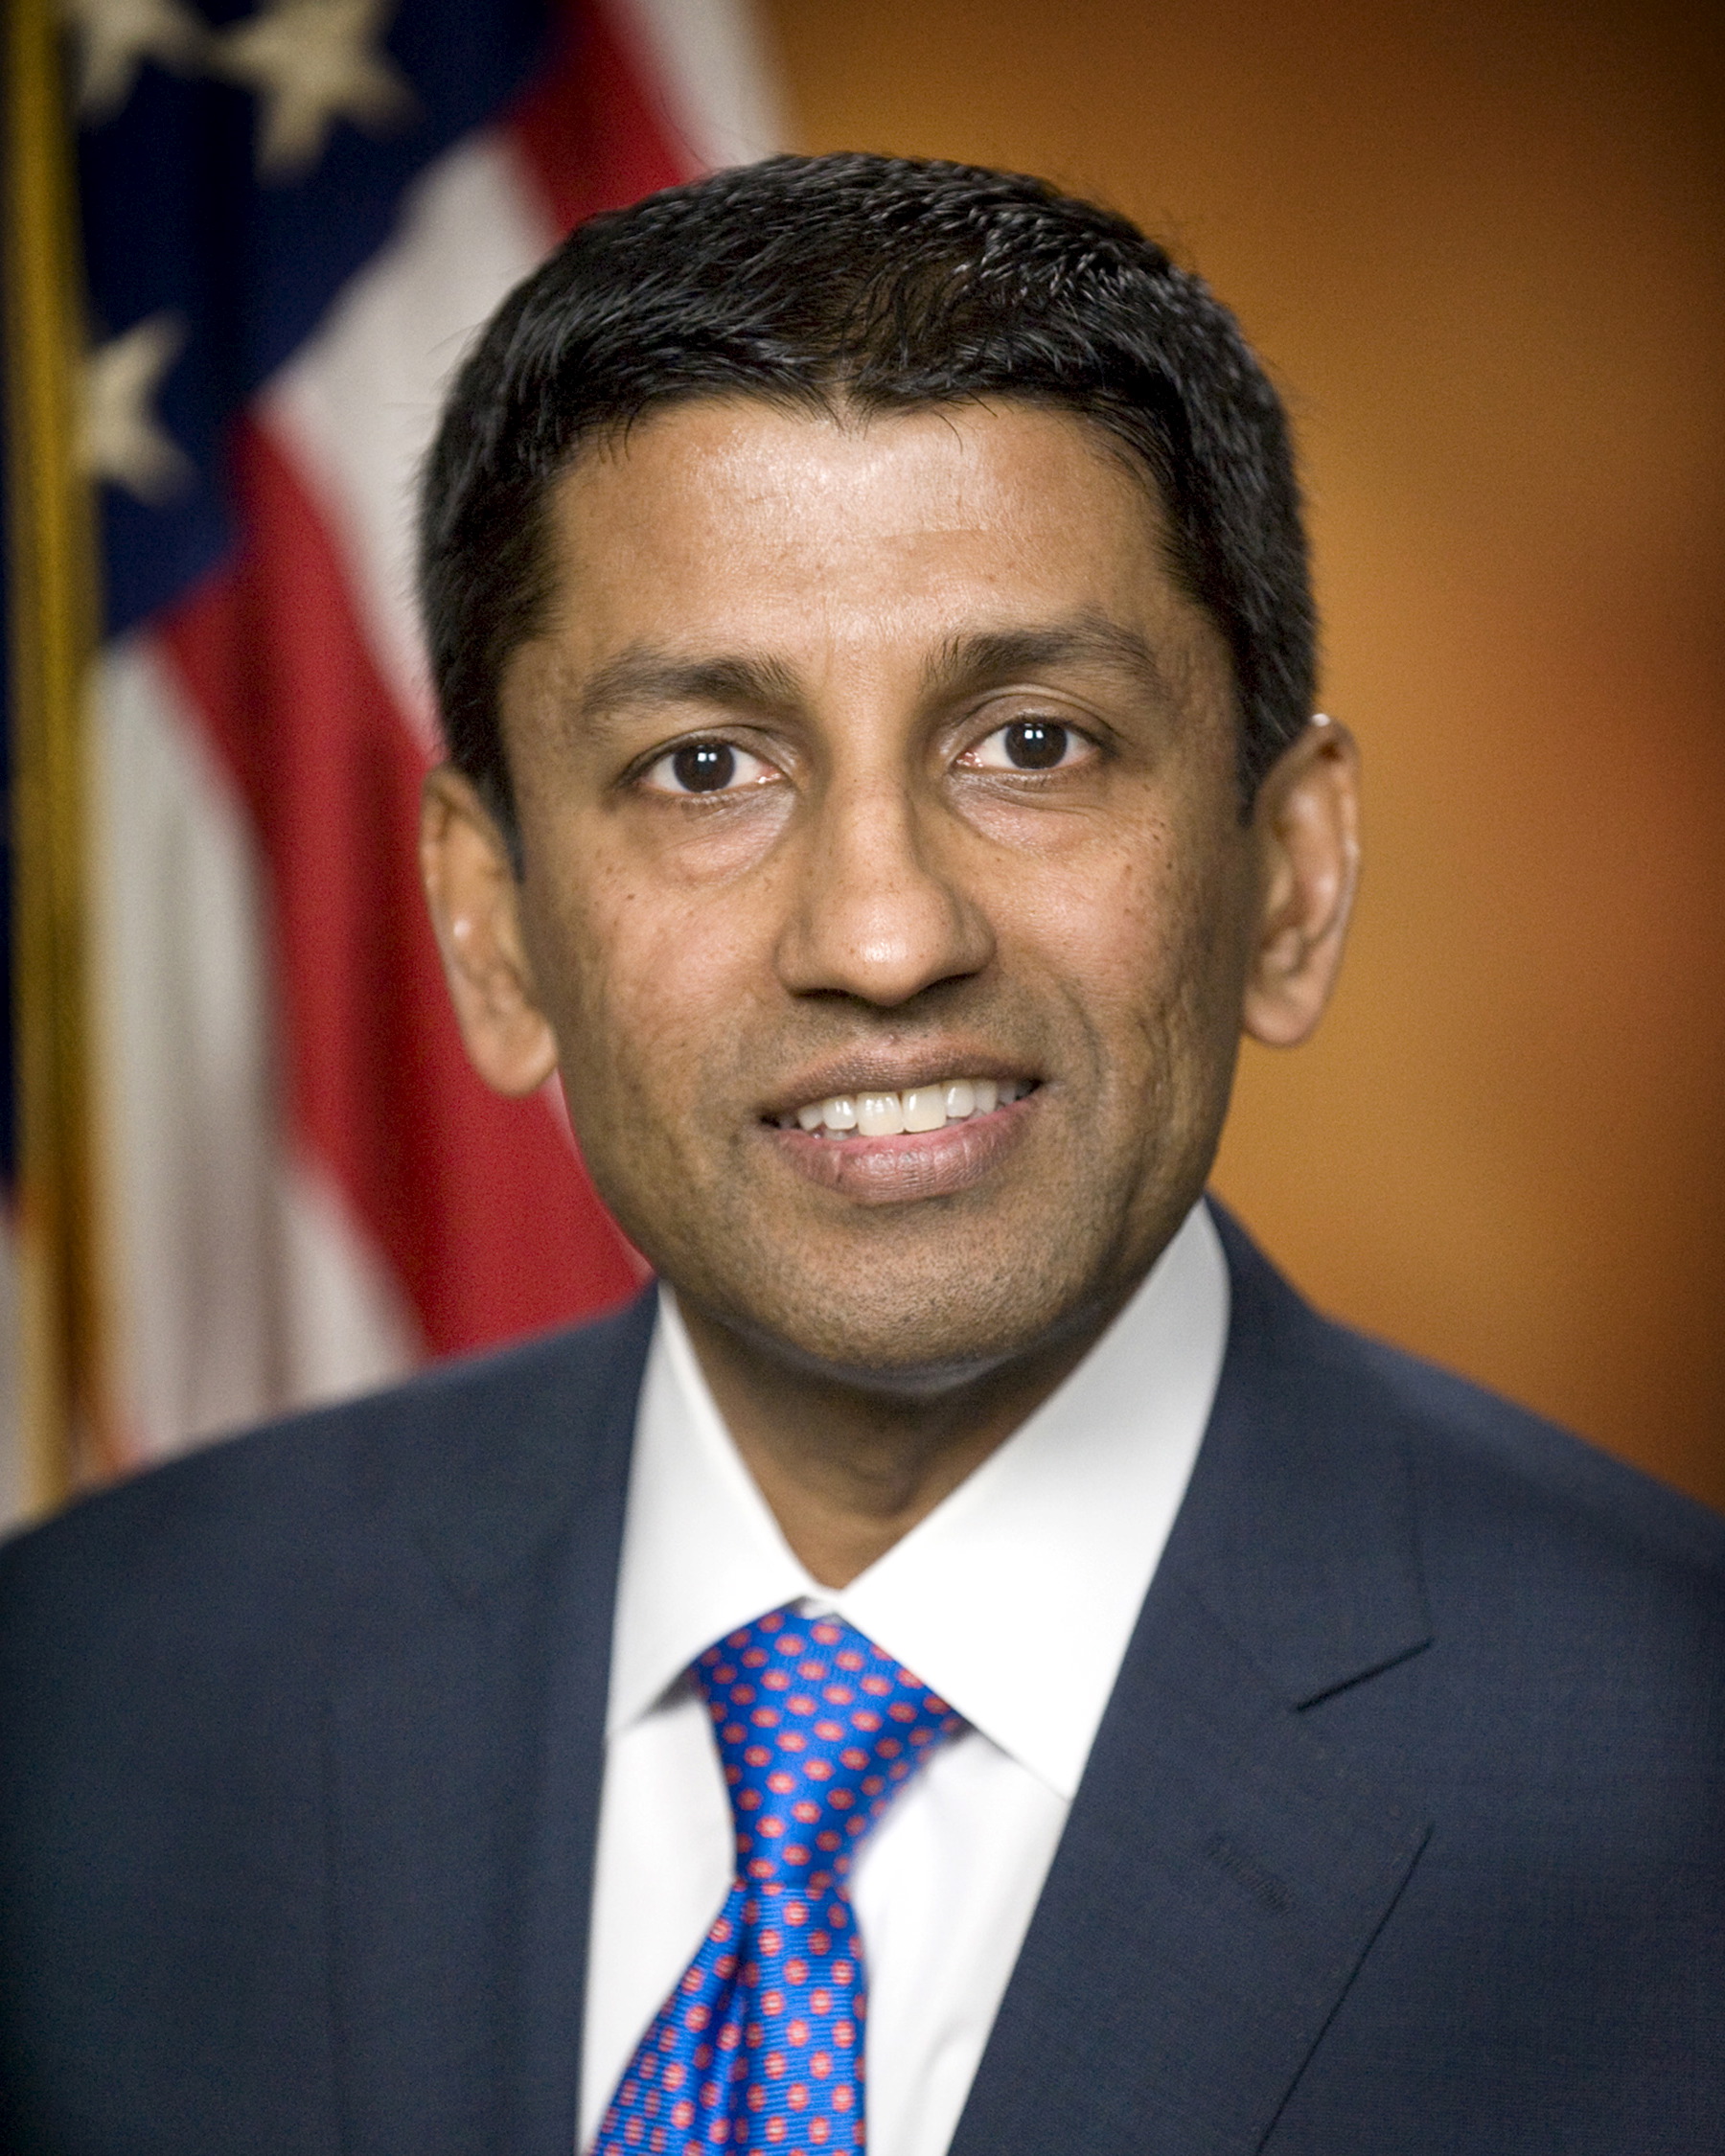 PHOTO:U.S. Deputy Solicitor General Sri Srinivasan is pictured in this undated file photo courtesy of the United States Department of Justice.  